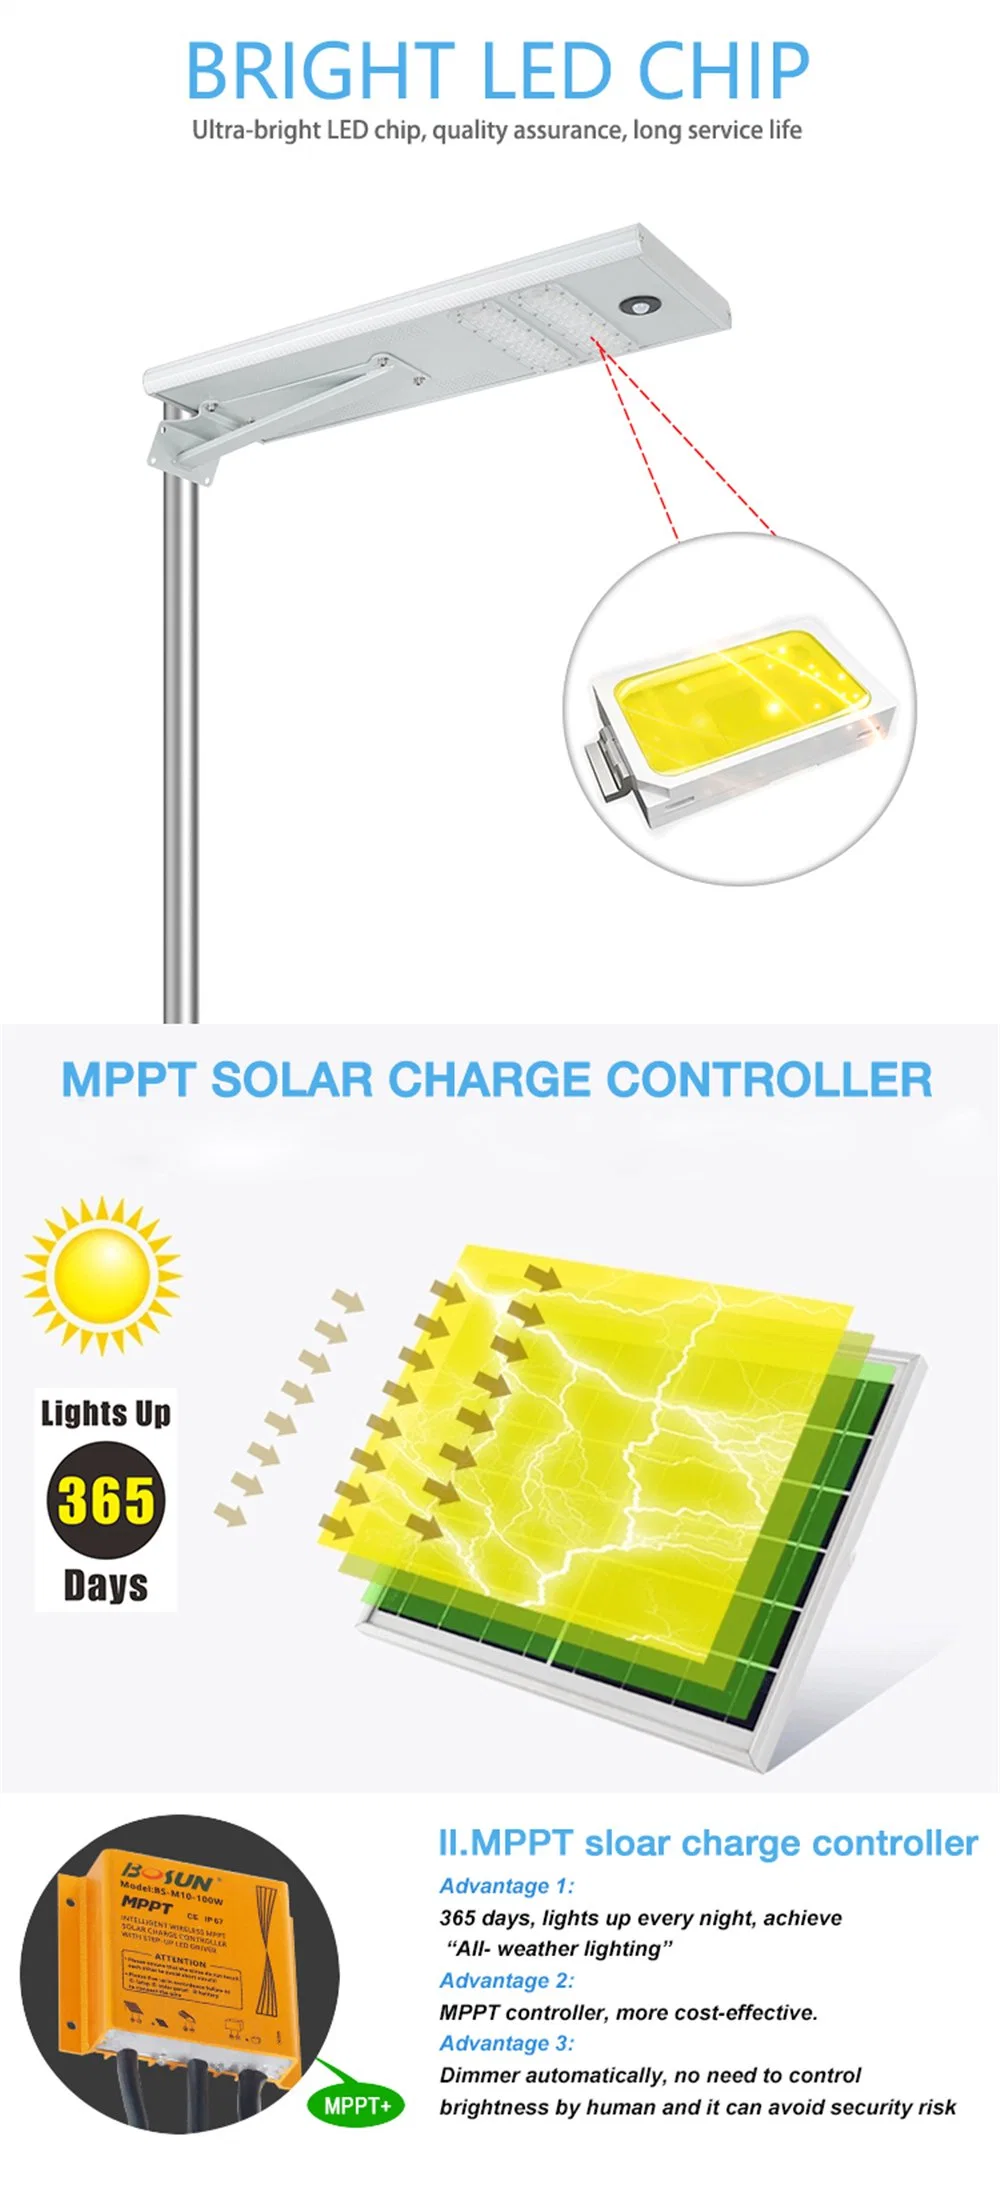 Hepu 15W-120W OEM/ODM All in One Integrated Solar Street Light Manufacturer in China